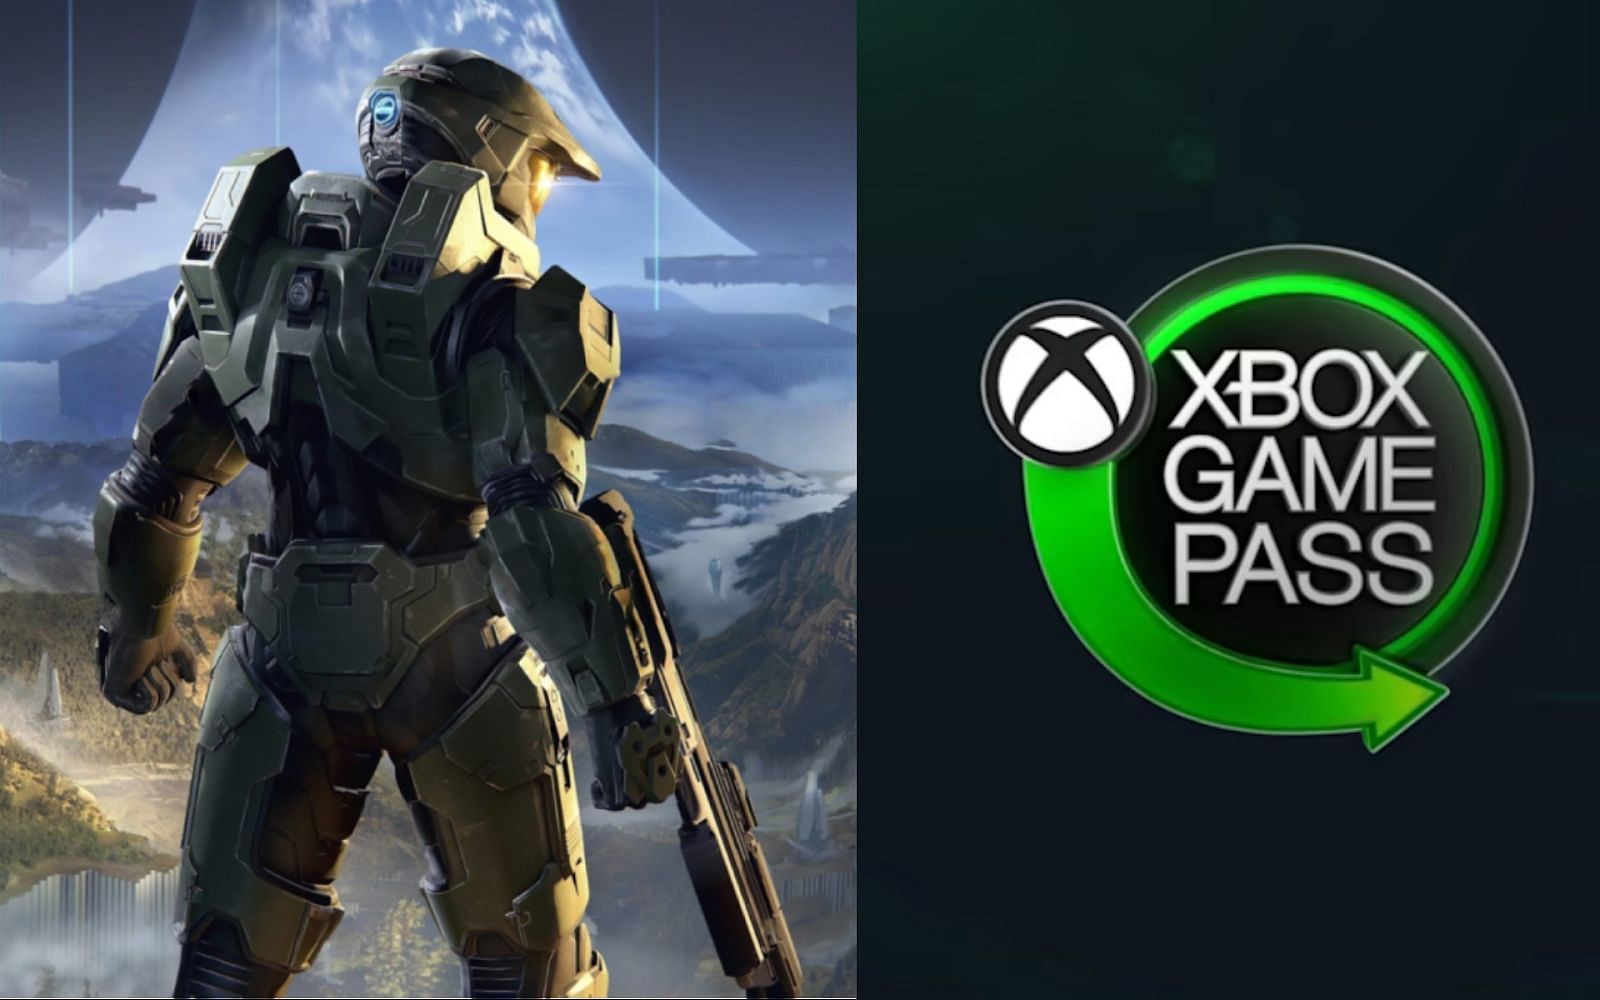 Games coming to Xbox Game Pass in December 2021